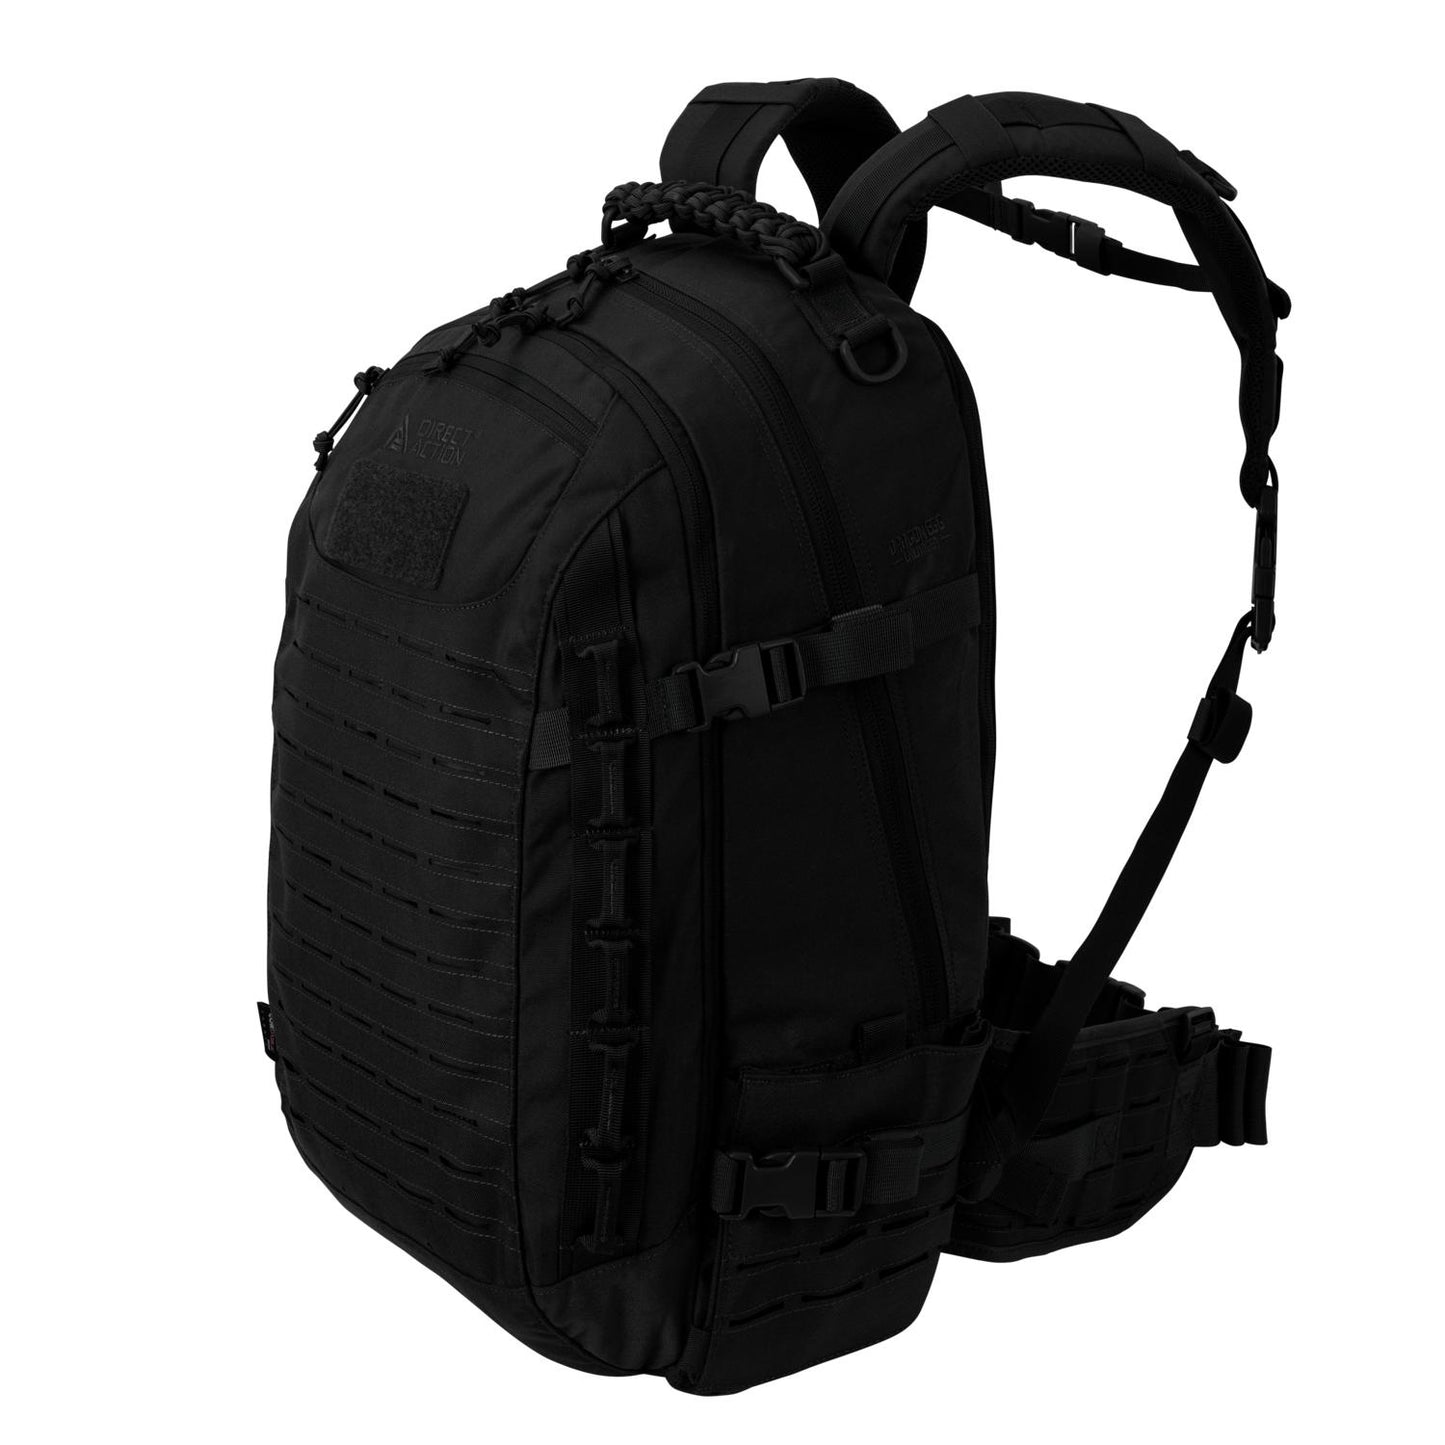 Direct Action Dragon Egg® Enlarged - Modular Military Tactical Backpack